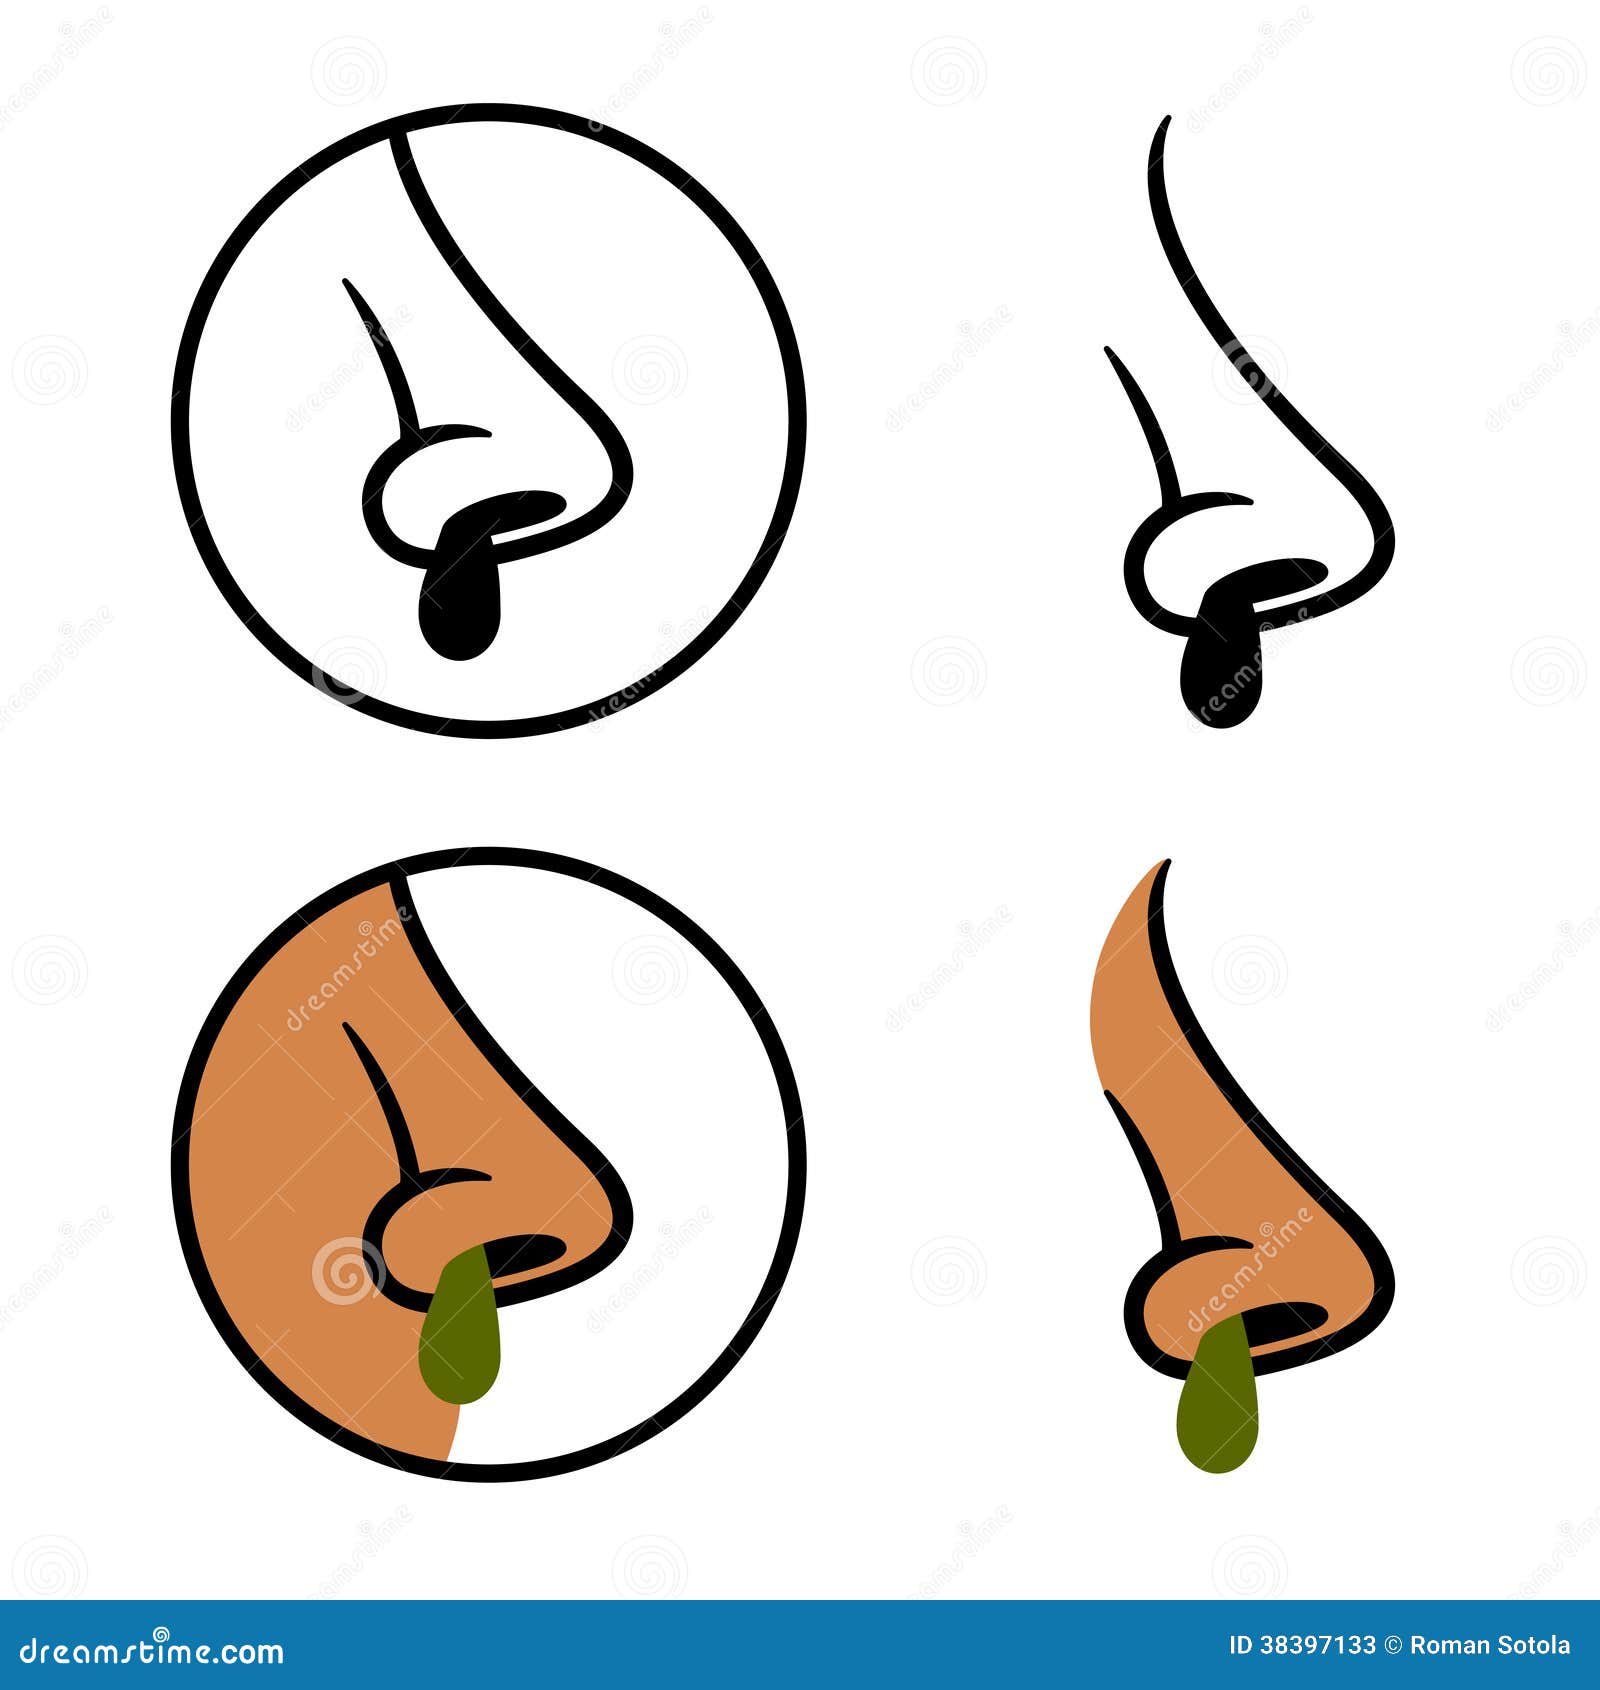 clipart runny nose - photo #23